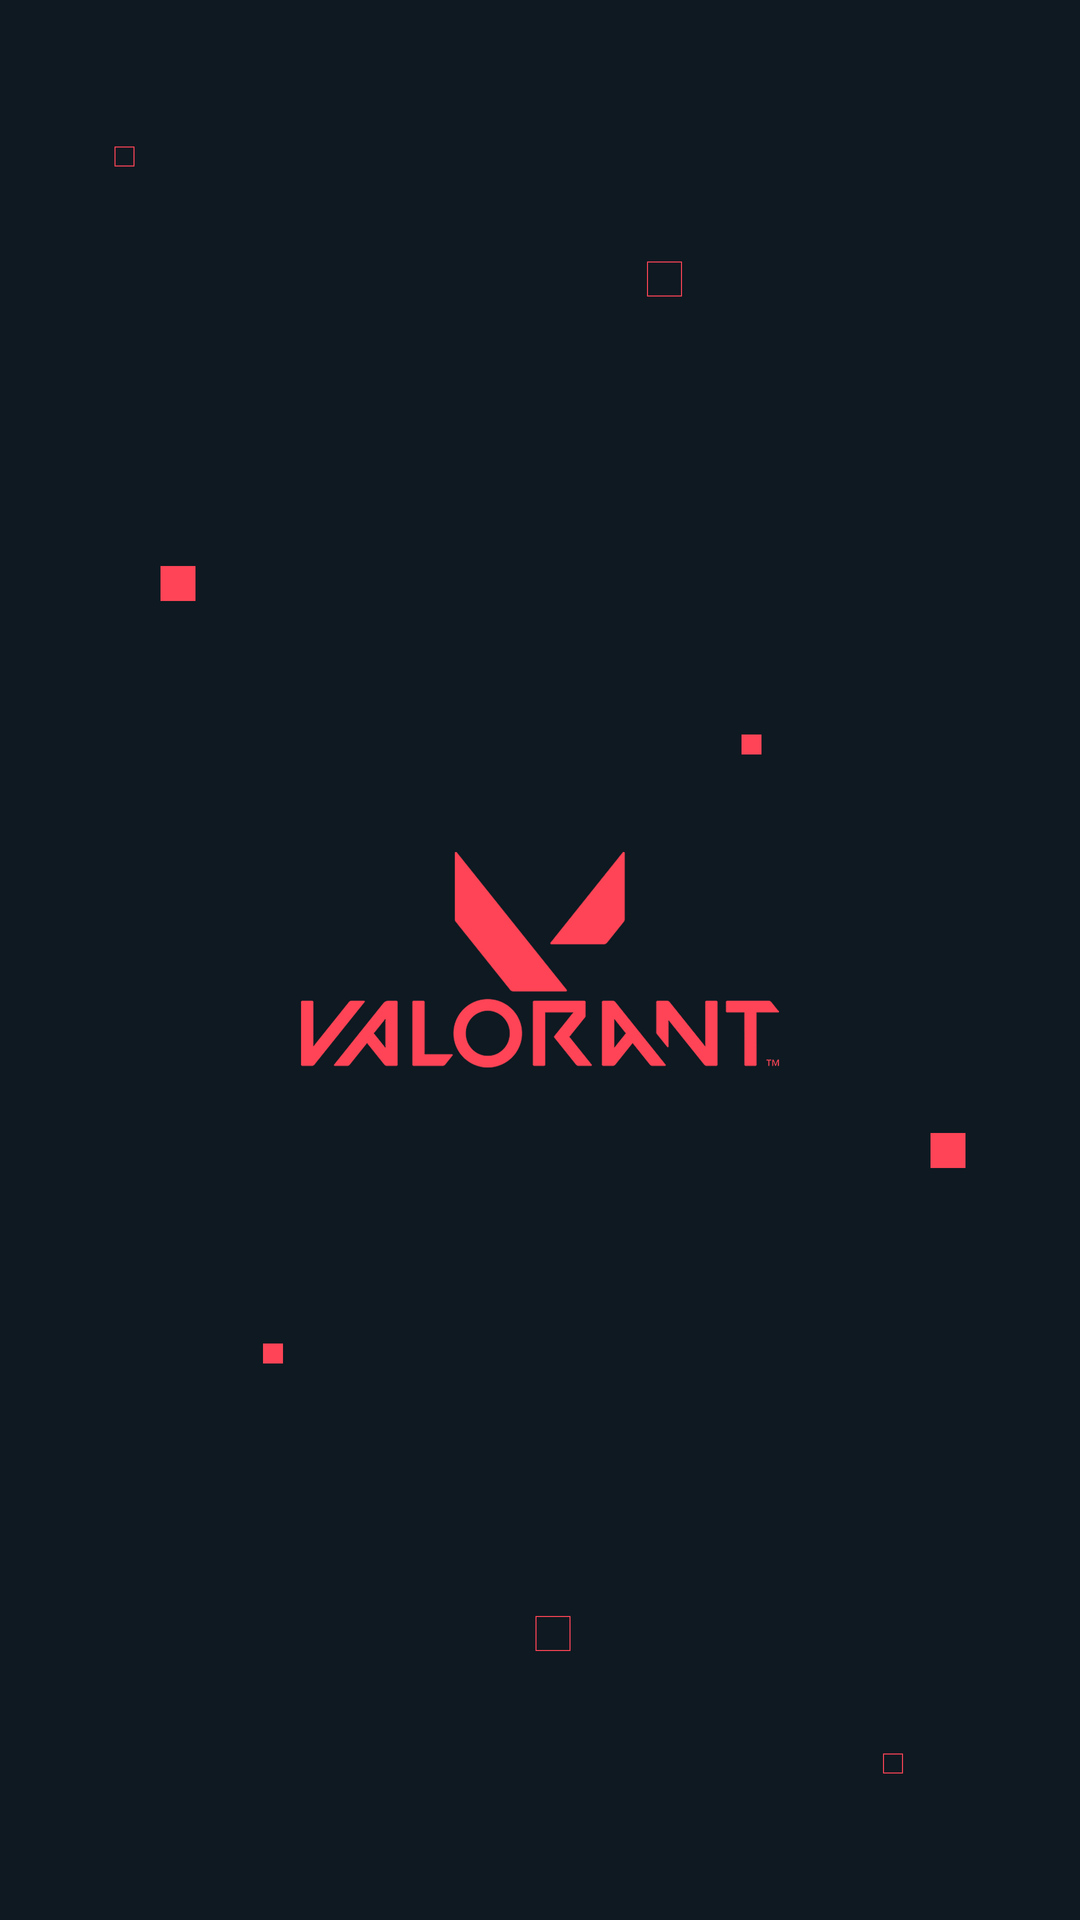 1080x1920 Valorant Logo 4k Iphone 7,6s,6 Plus, Pixel xl ,One Plus 3,3t,5 HD  4k Wallpapers, Images, Backgrounds, Photos and Pictures